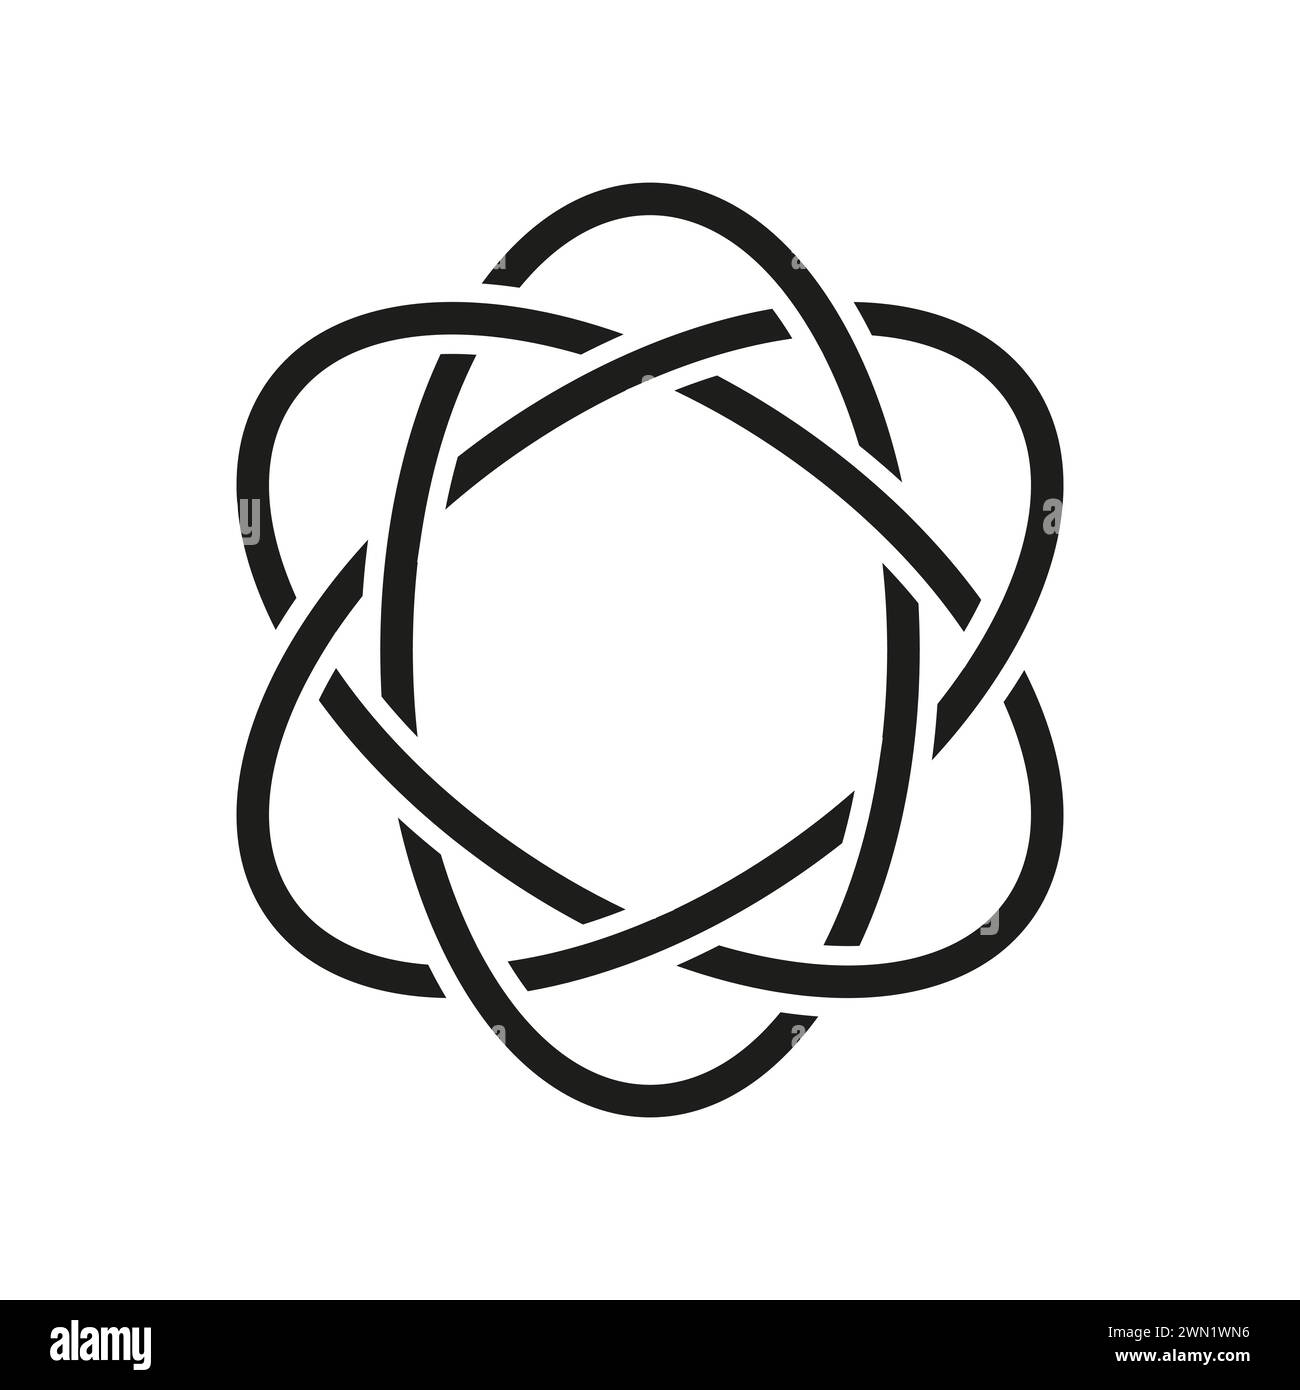 Interlaced rings pattern. Unity complexity art. Simple, infinite. Vector illustration. EPS 10. Stock Vector